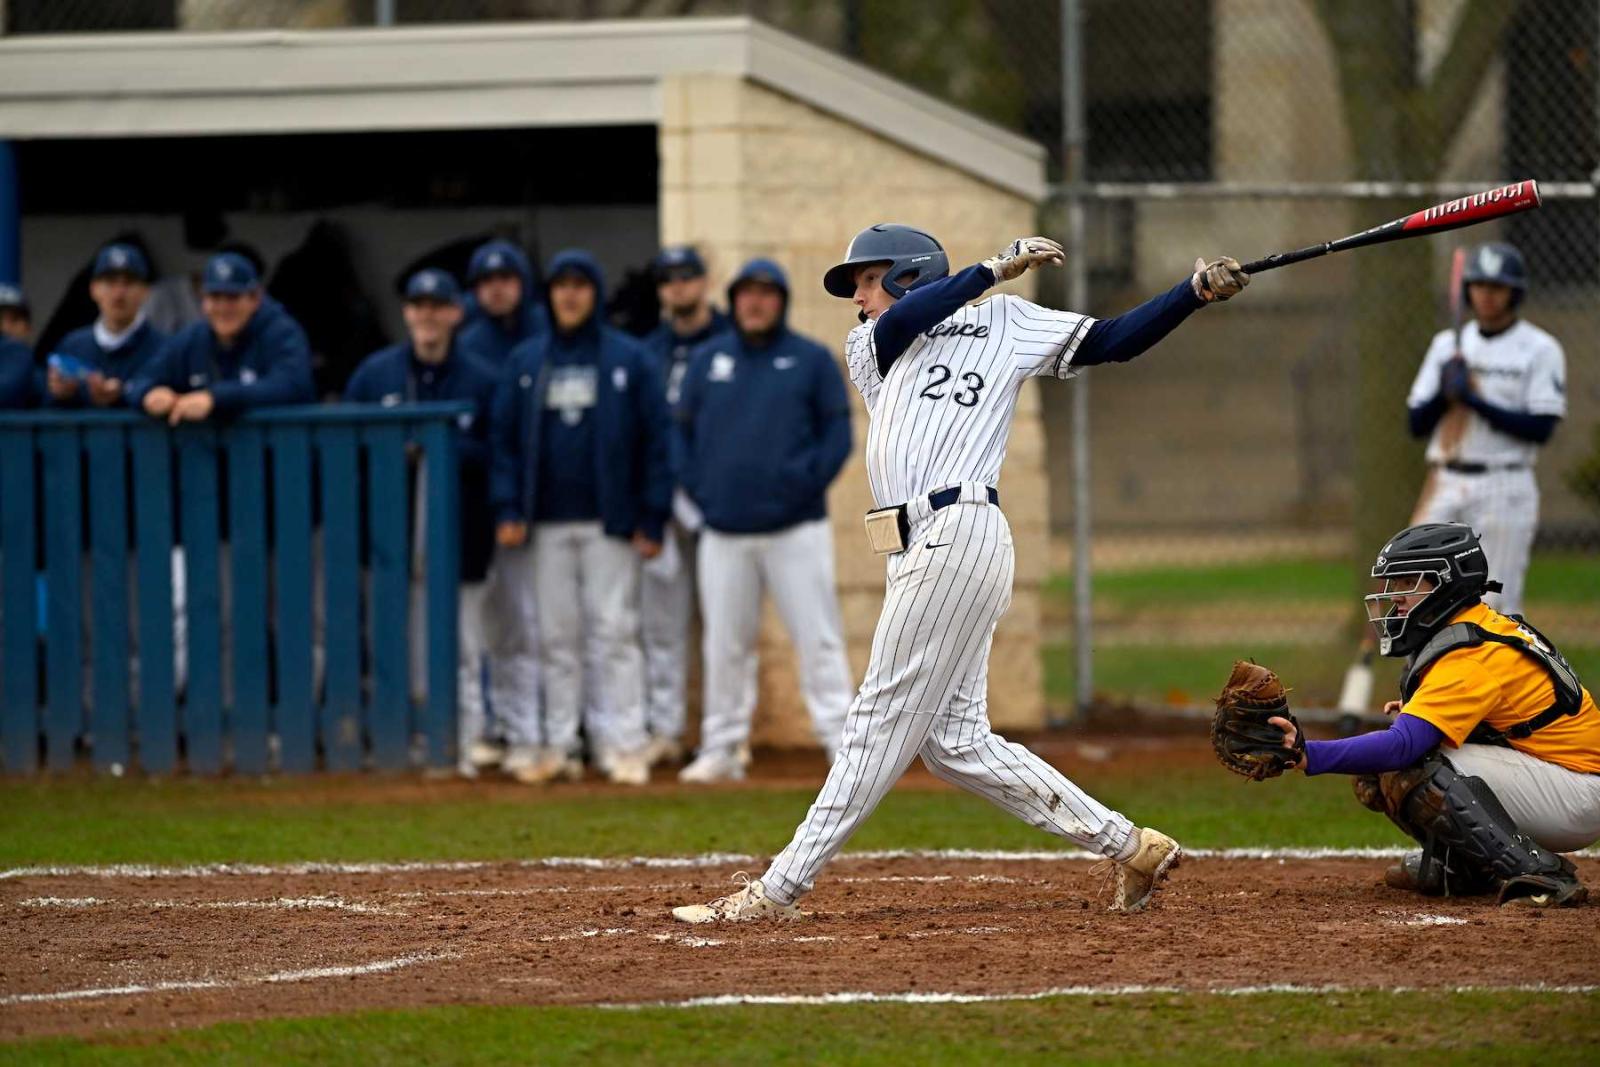 Lawrence baseball player Jacob Charon swings at a pitch as teammates look on.